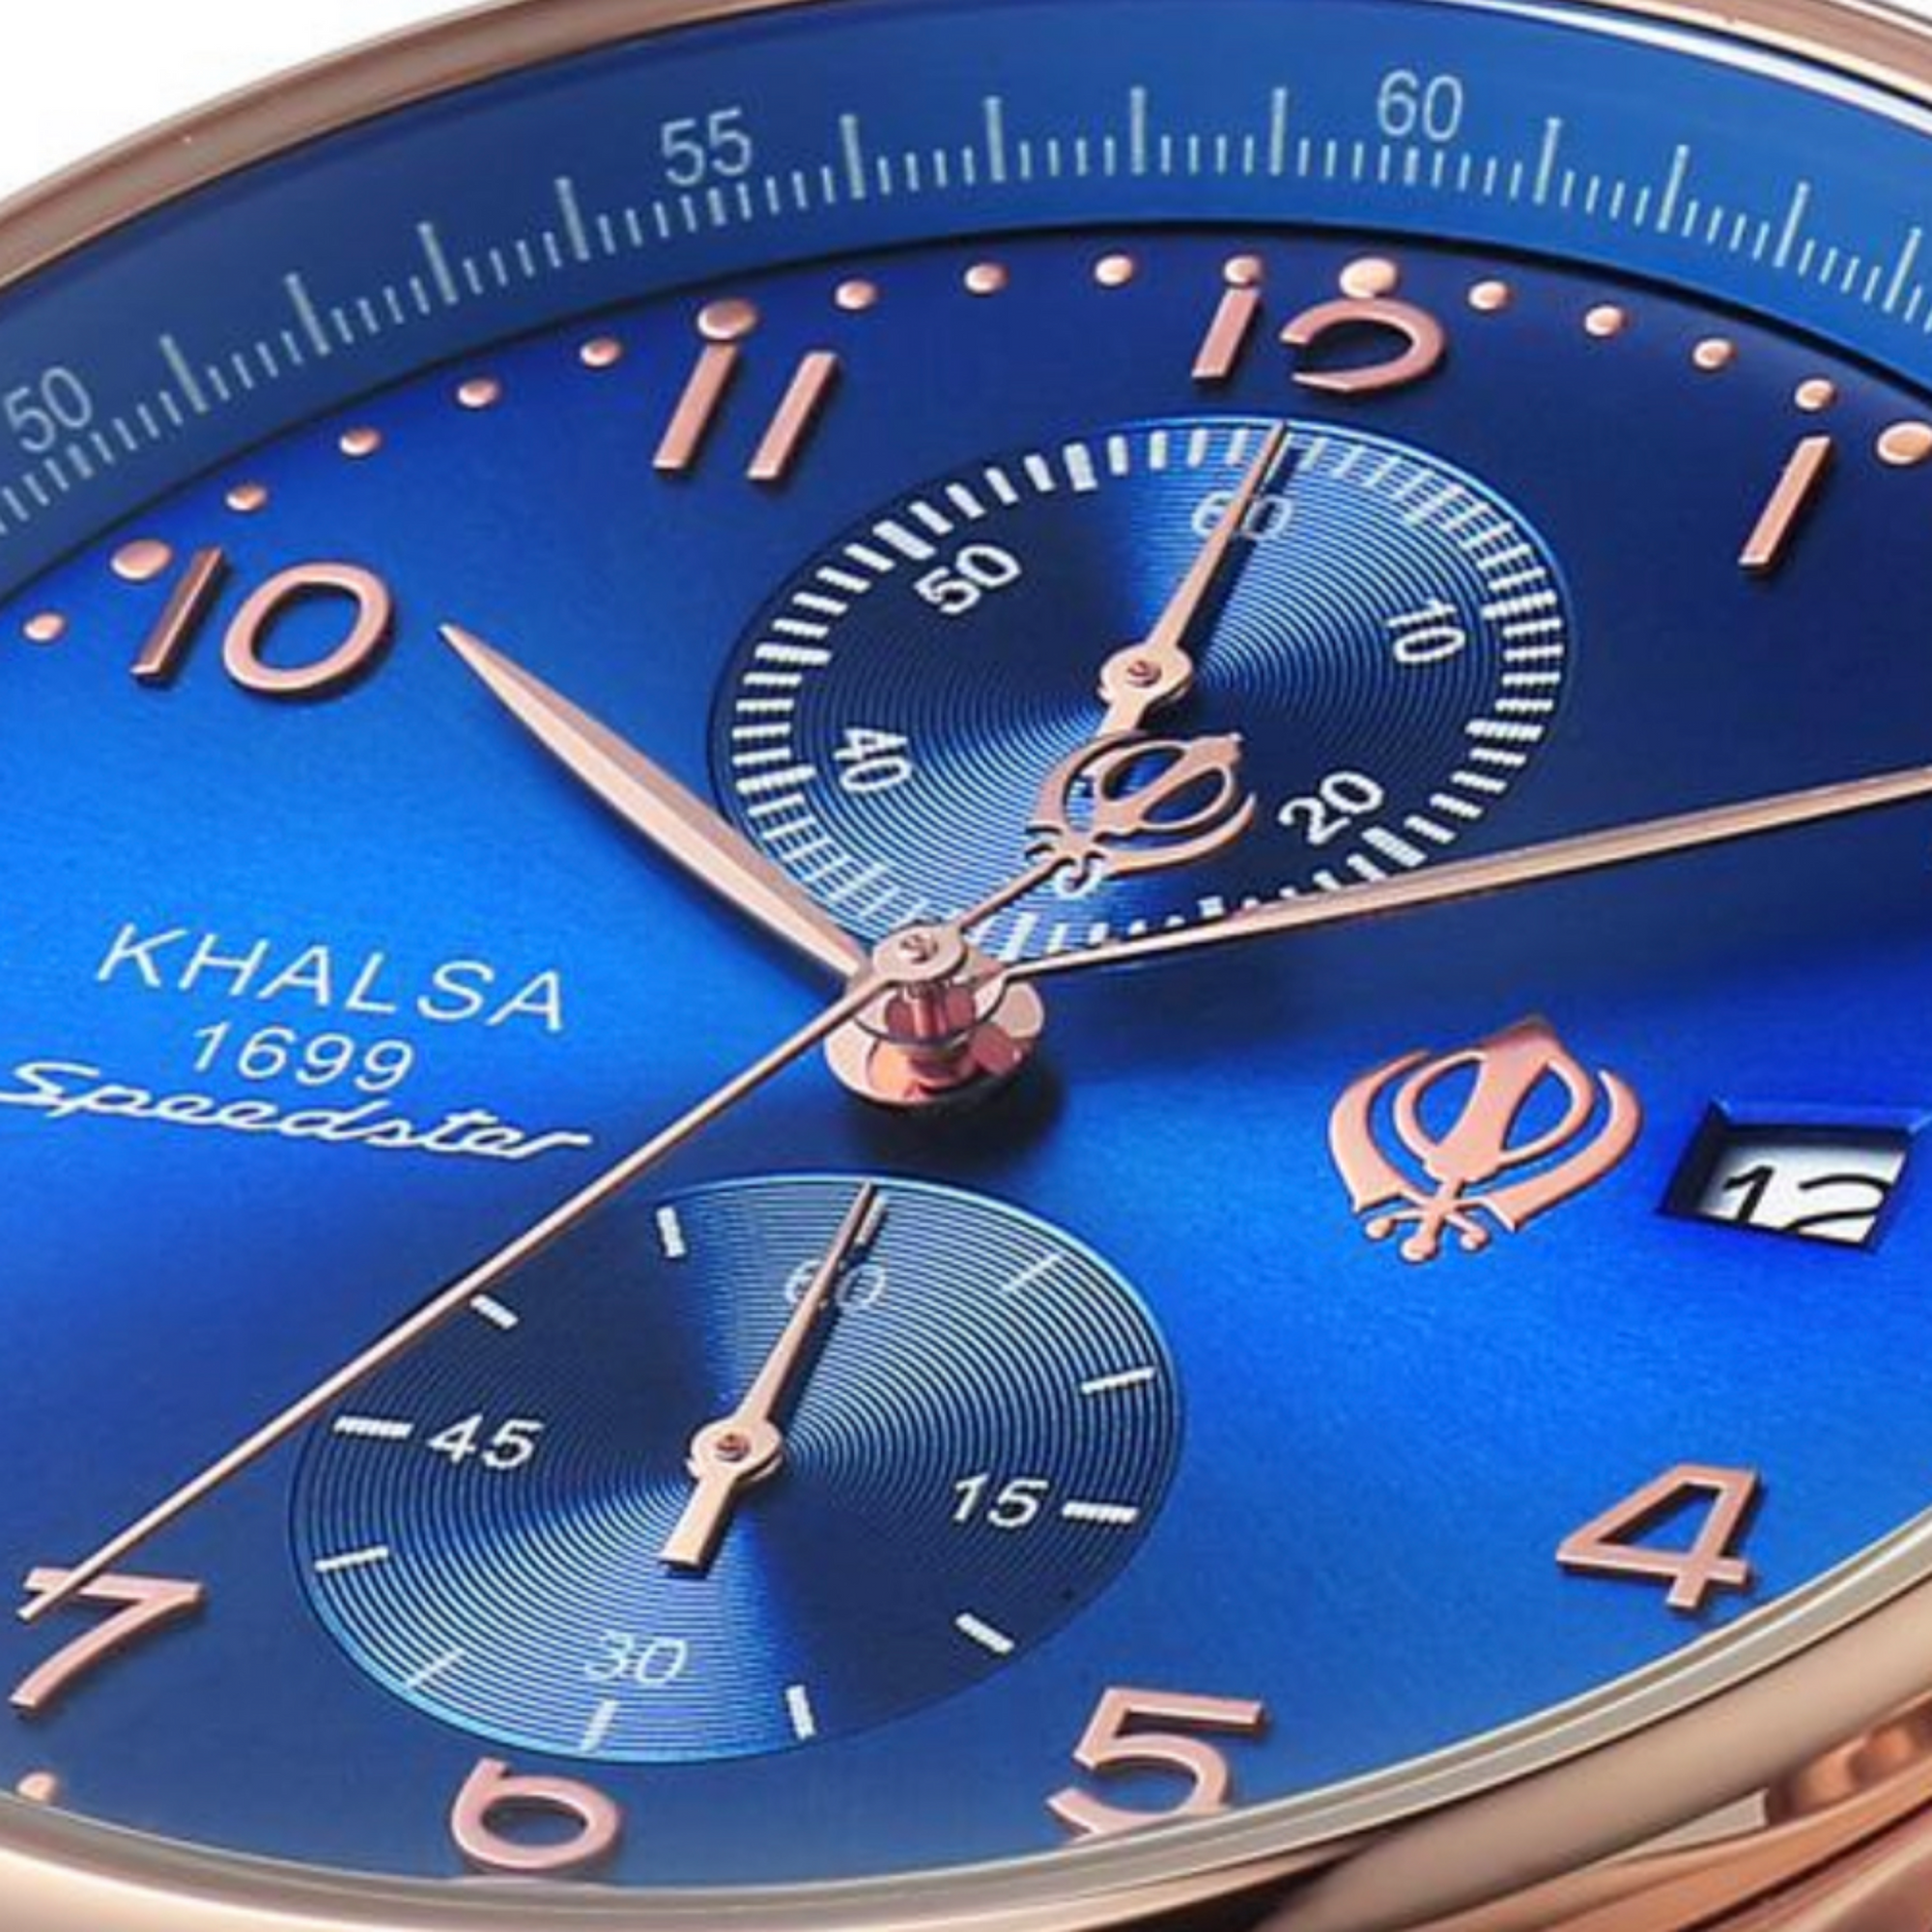 House of Khalsa Sea Blue Speedster Khalsa Analog Chronograph Luxury Sikh Watch With Khanda Symbol On The Dial and Brown Leather Strap - Elegant and Priceless